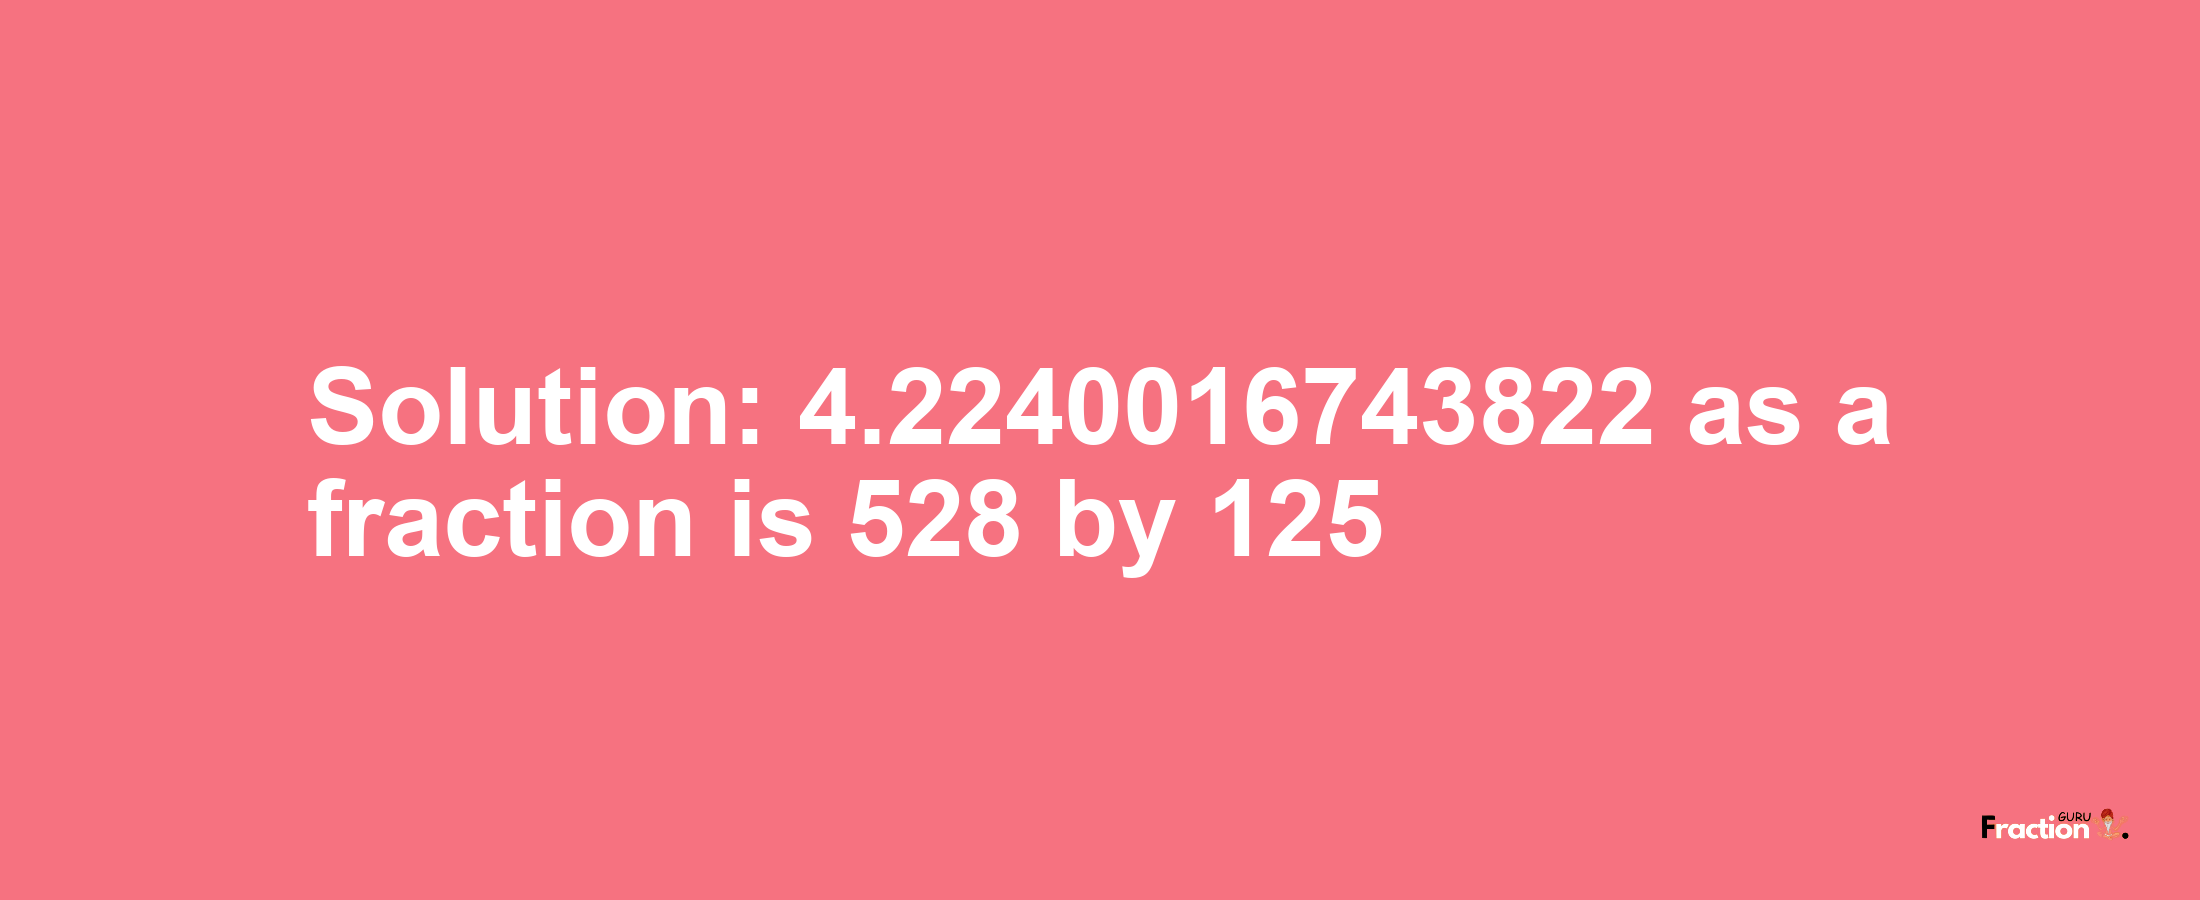 Solution:4.2240016743822 as a fraction is 528/125